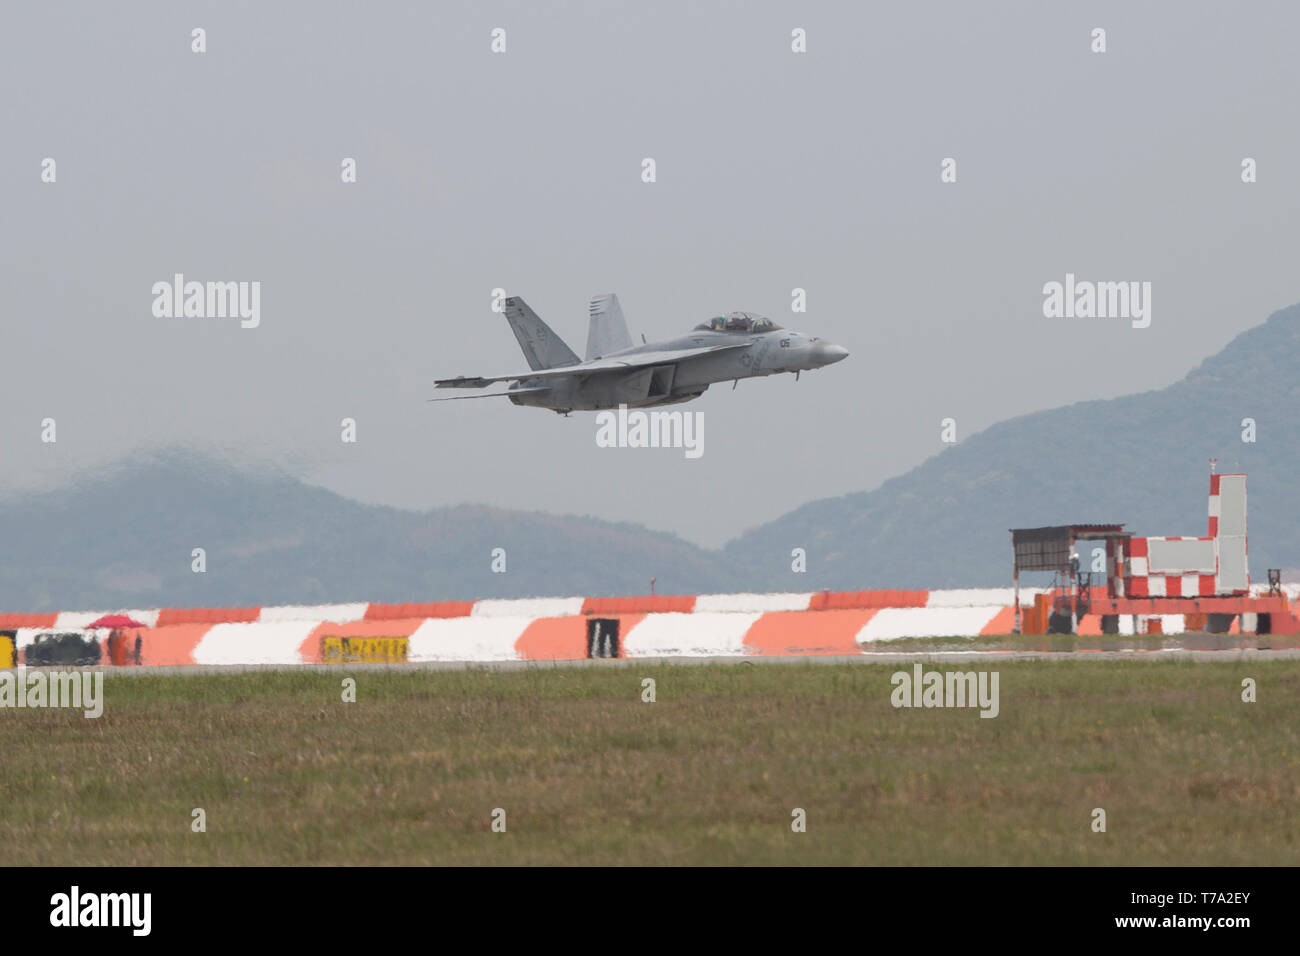 A Carrier Air Wing (CVW) 5 F/A-18F Super Hornet performs a flight demonstration during the 43rd Japan Maritime Self-Defense Force – Marine Corps Air Station Iwakuni Friendship Day at MCAS Iwakuni, Japan, May 5, 2019. This year was the first time that aircraft from CVW-5 participated in the air show since their arrival at MCAS Iwakuni. Since 1973, MCAS Iwakuni has held a single-day air show designed to foster positive relationships and offer an exciting experience that displays the communal support between the U.S. and Japan. The air show encompassed various U.S. and Japanese static display air Stock Photo